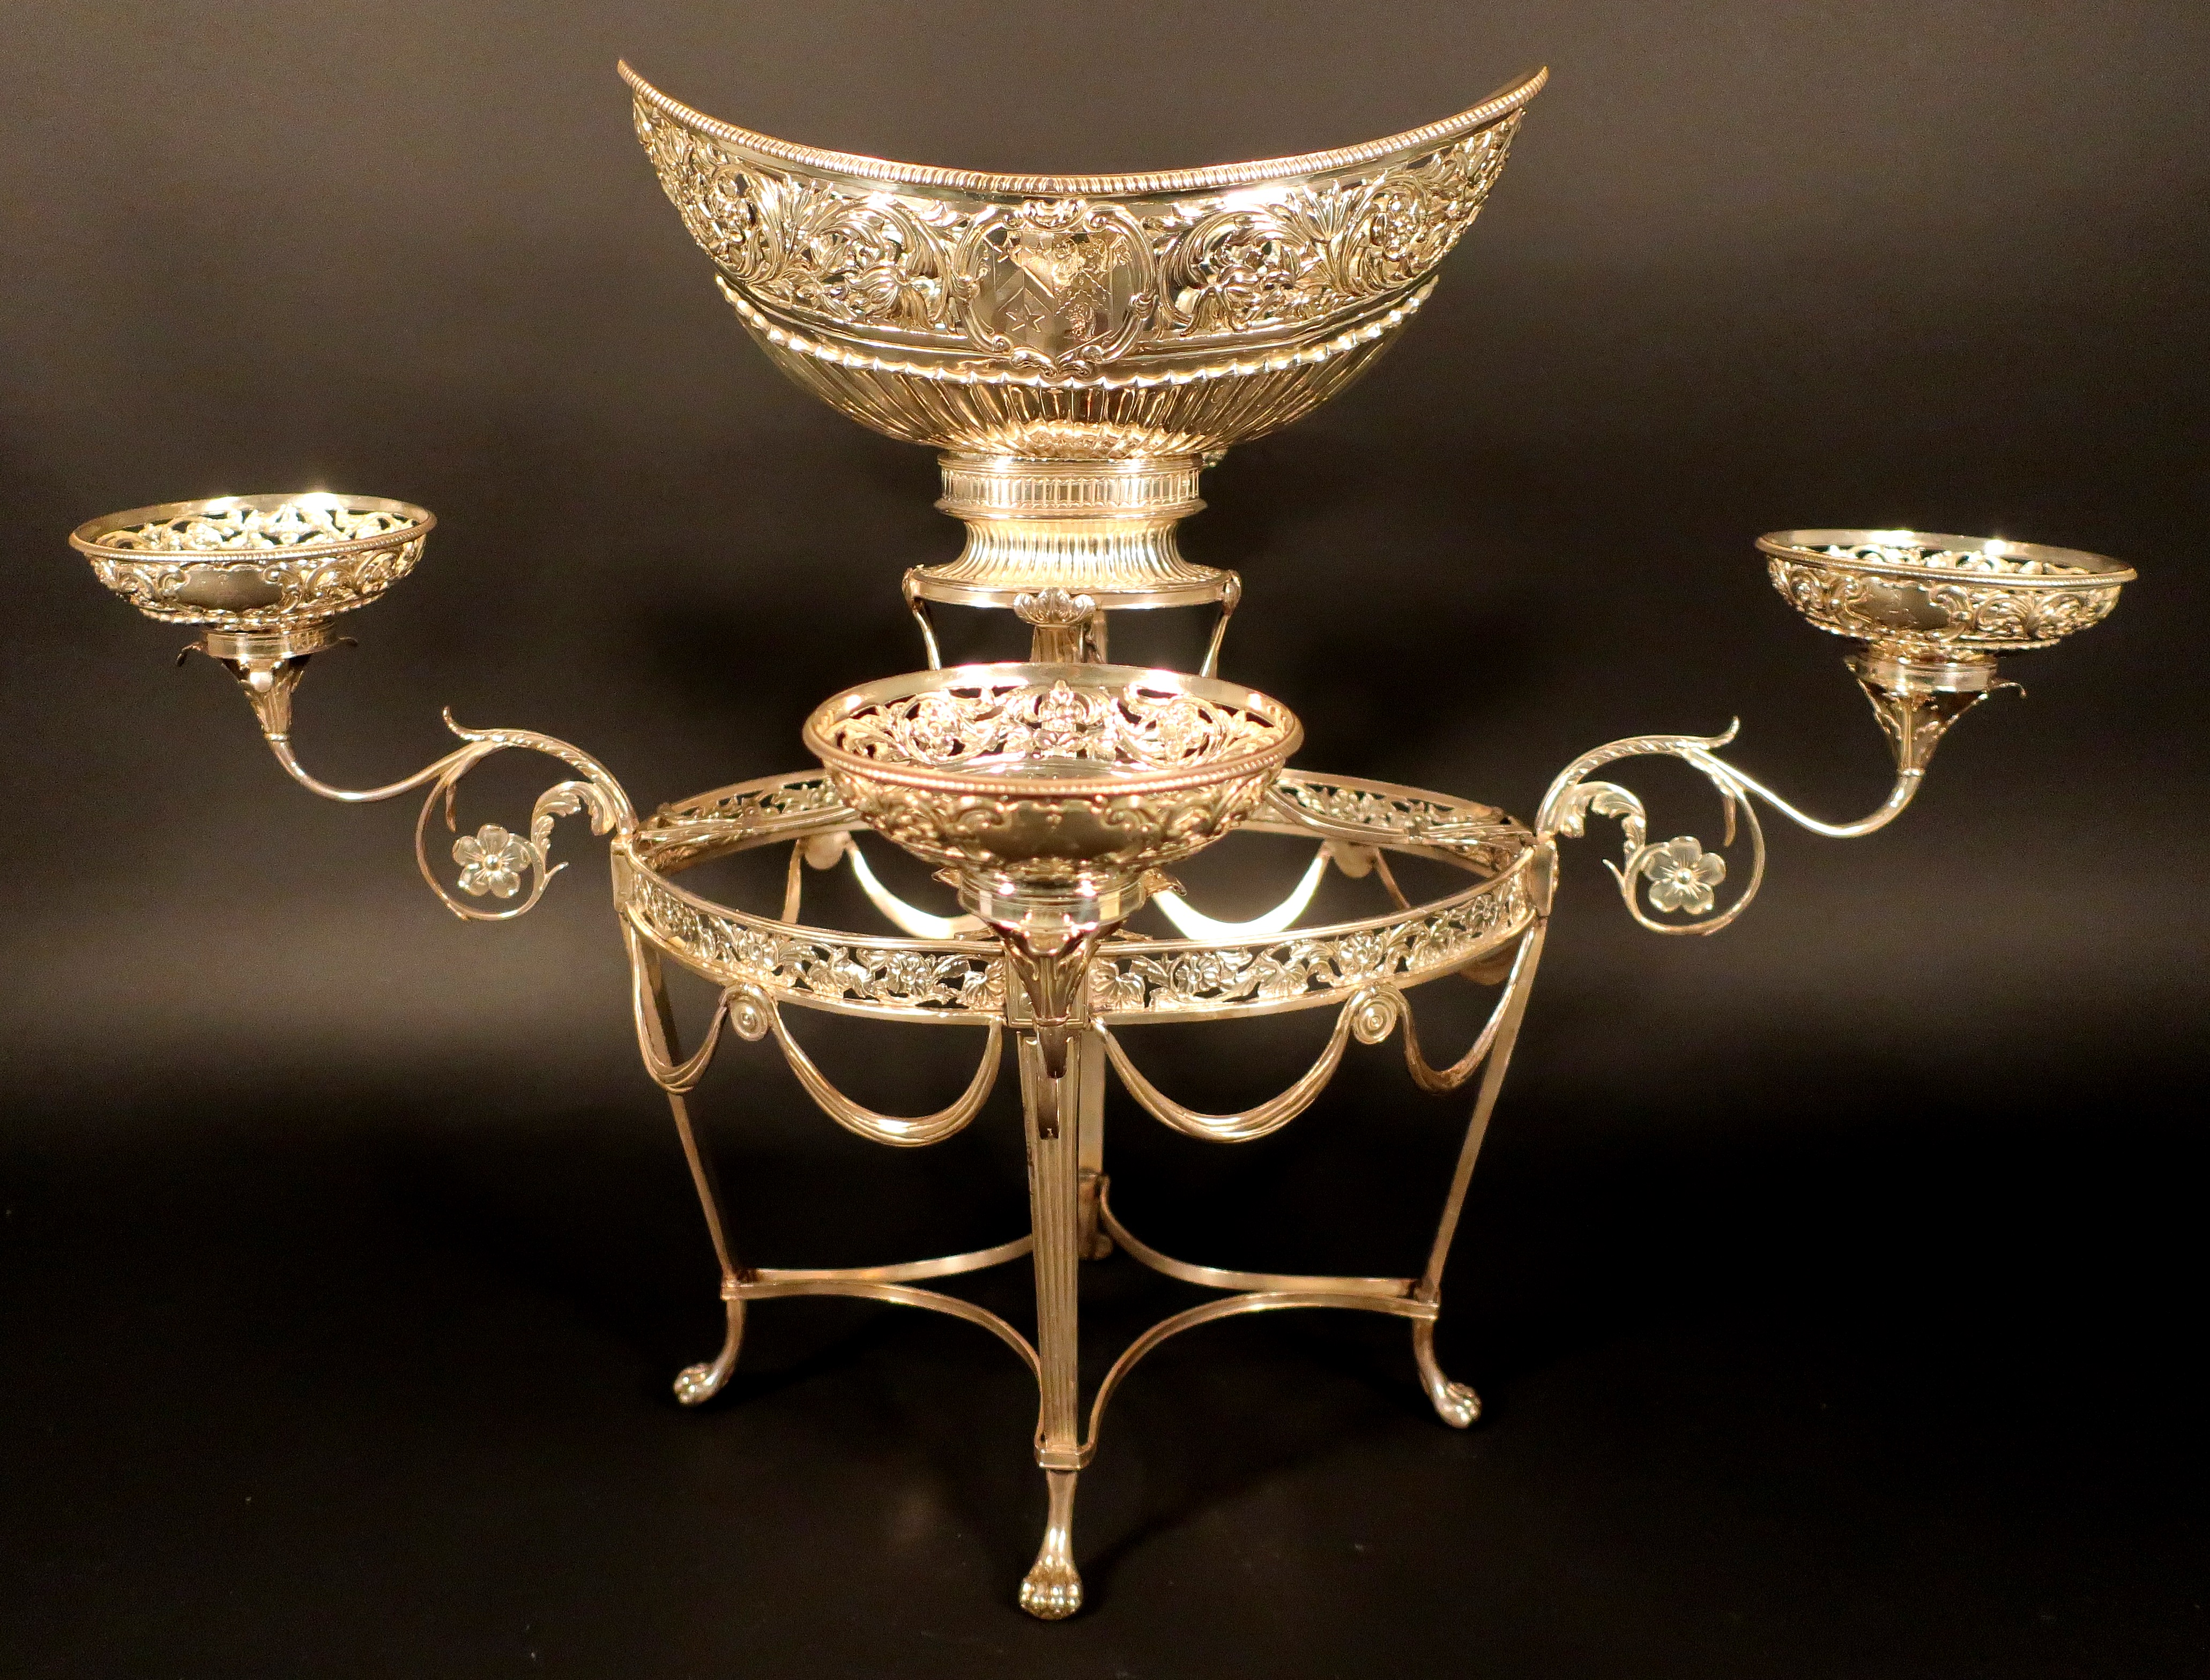 George III Sterling Epergne By William Pitts, London 1800. Sold For $4,875